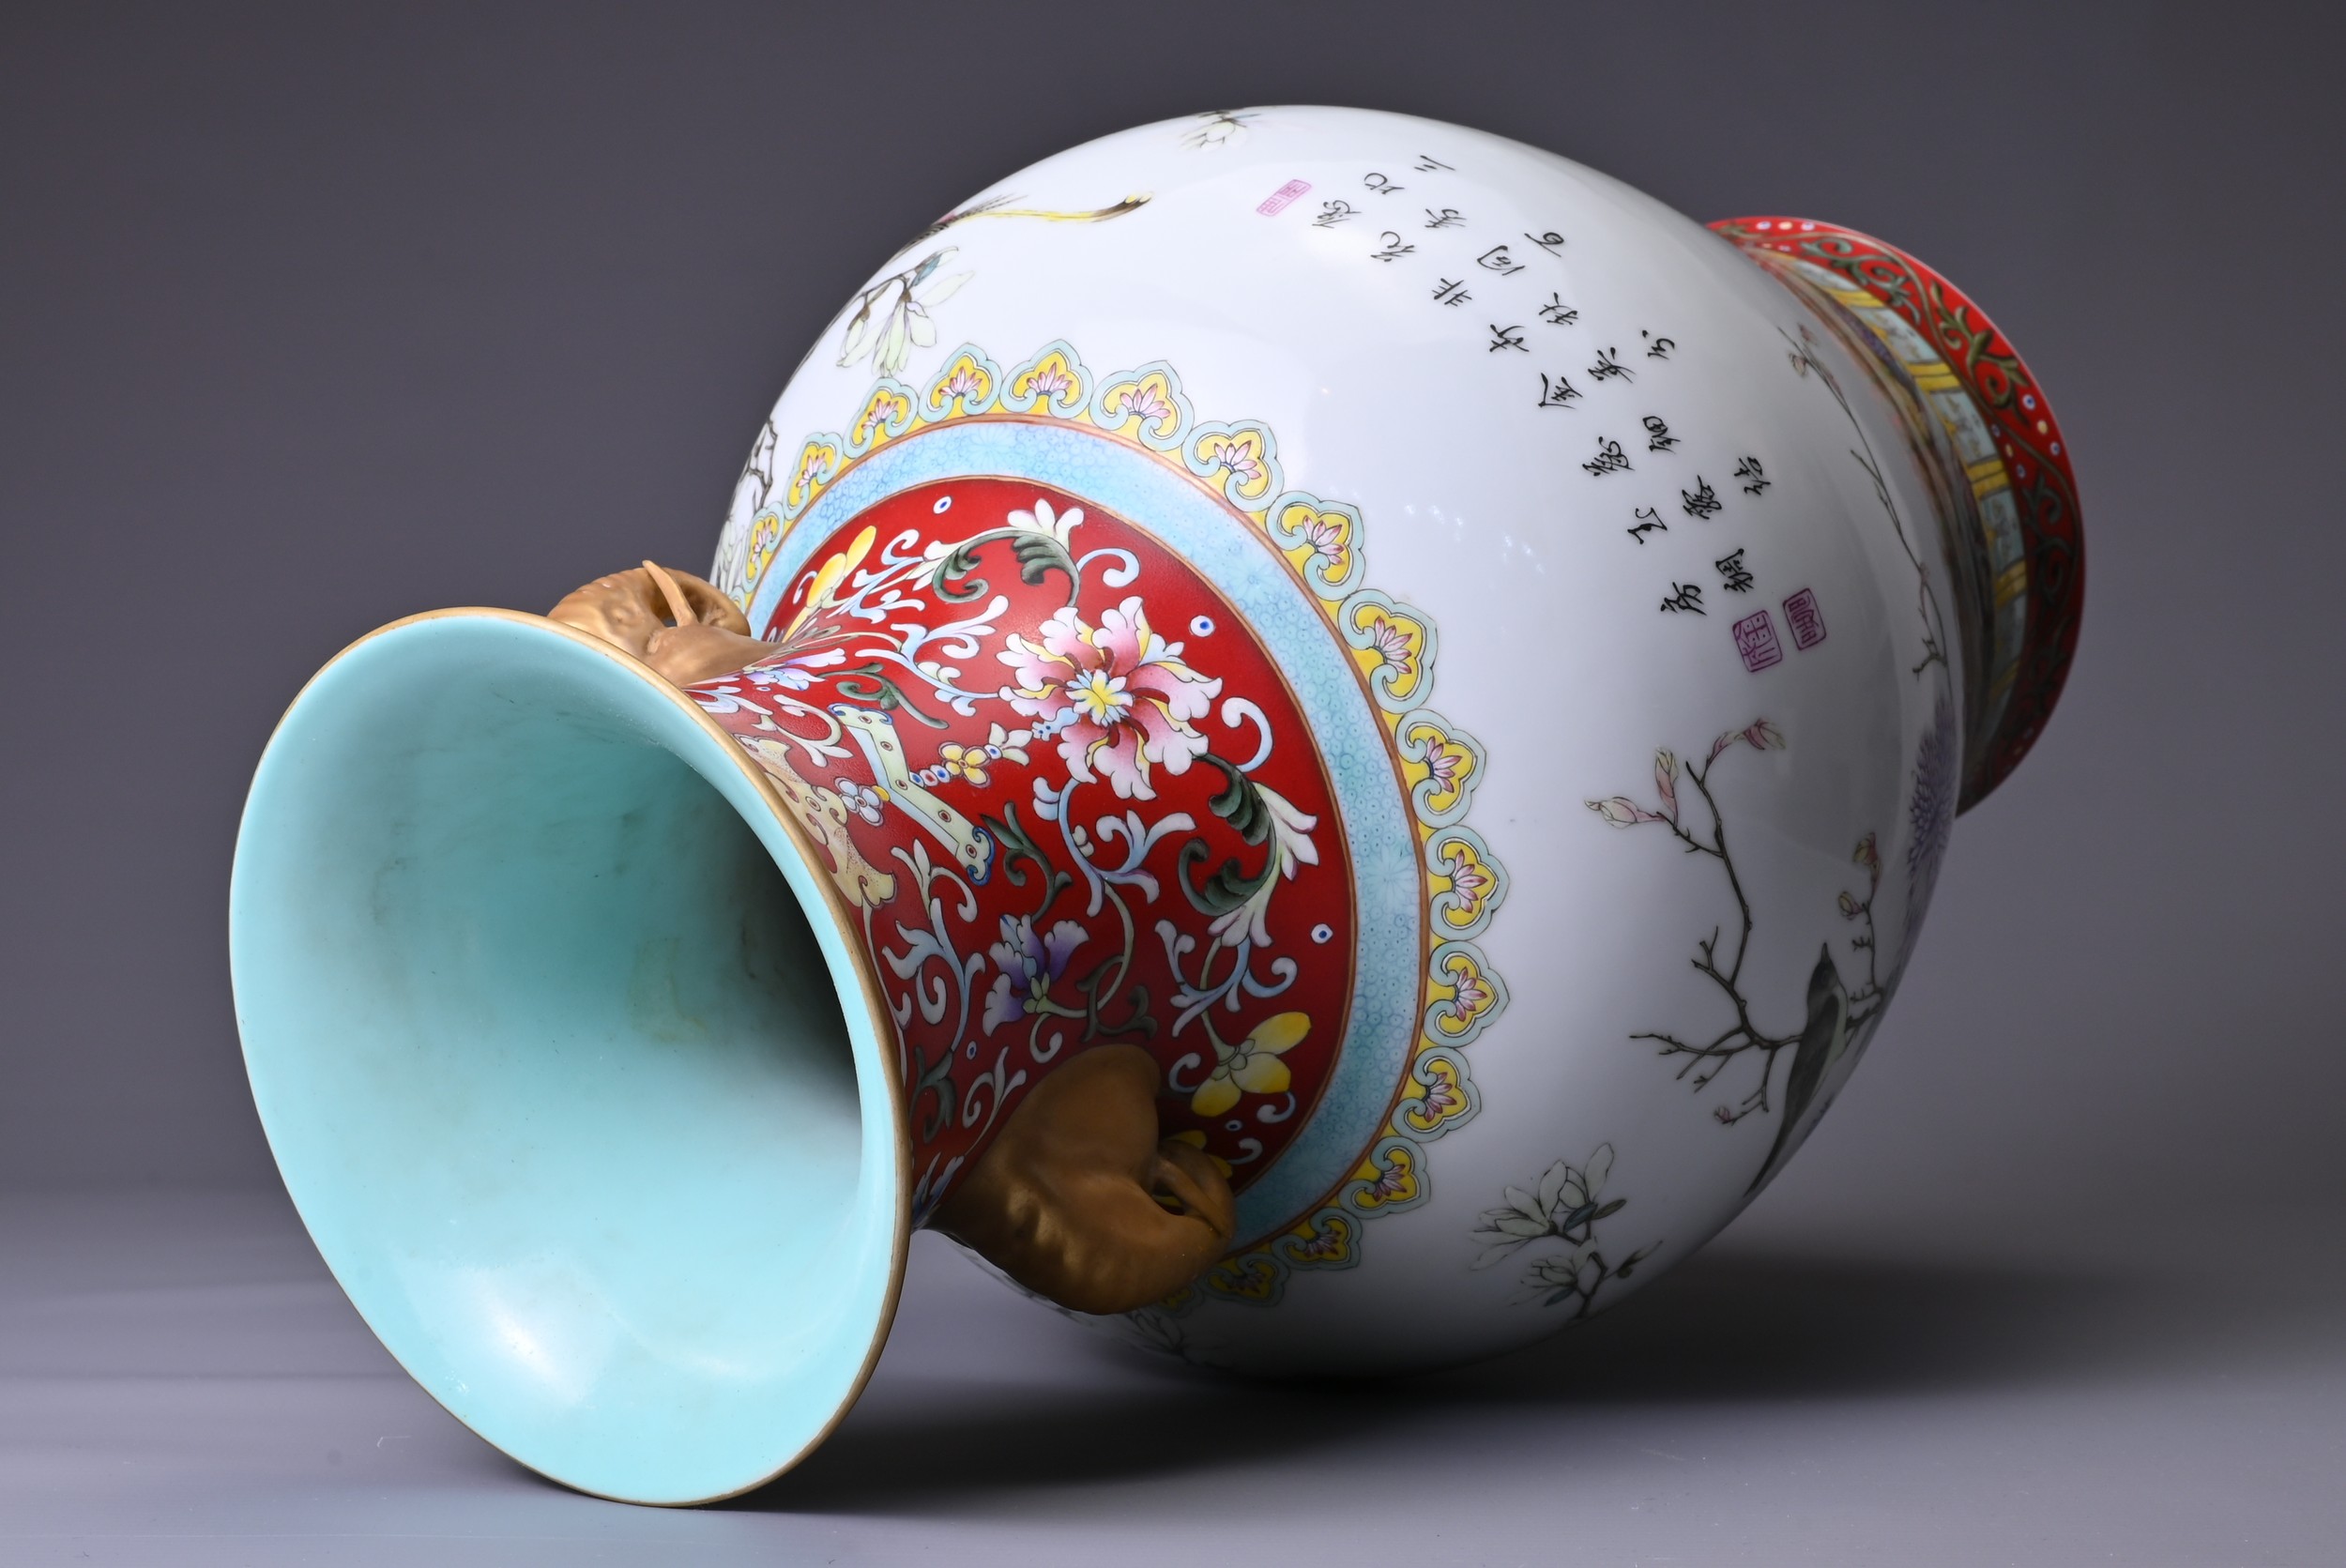 A CHINESE PORCELAIN FAMILLE ROSE RED-GROUND IMPERIAL-STYLE BALUSTER VASE, 20TH CENTURY. With - Image 8 of 9